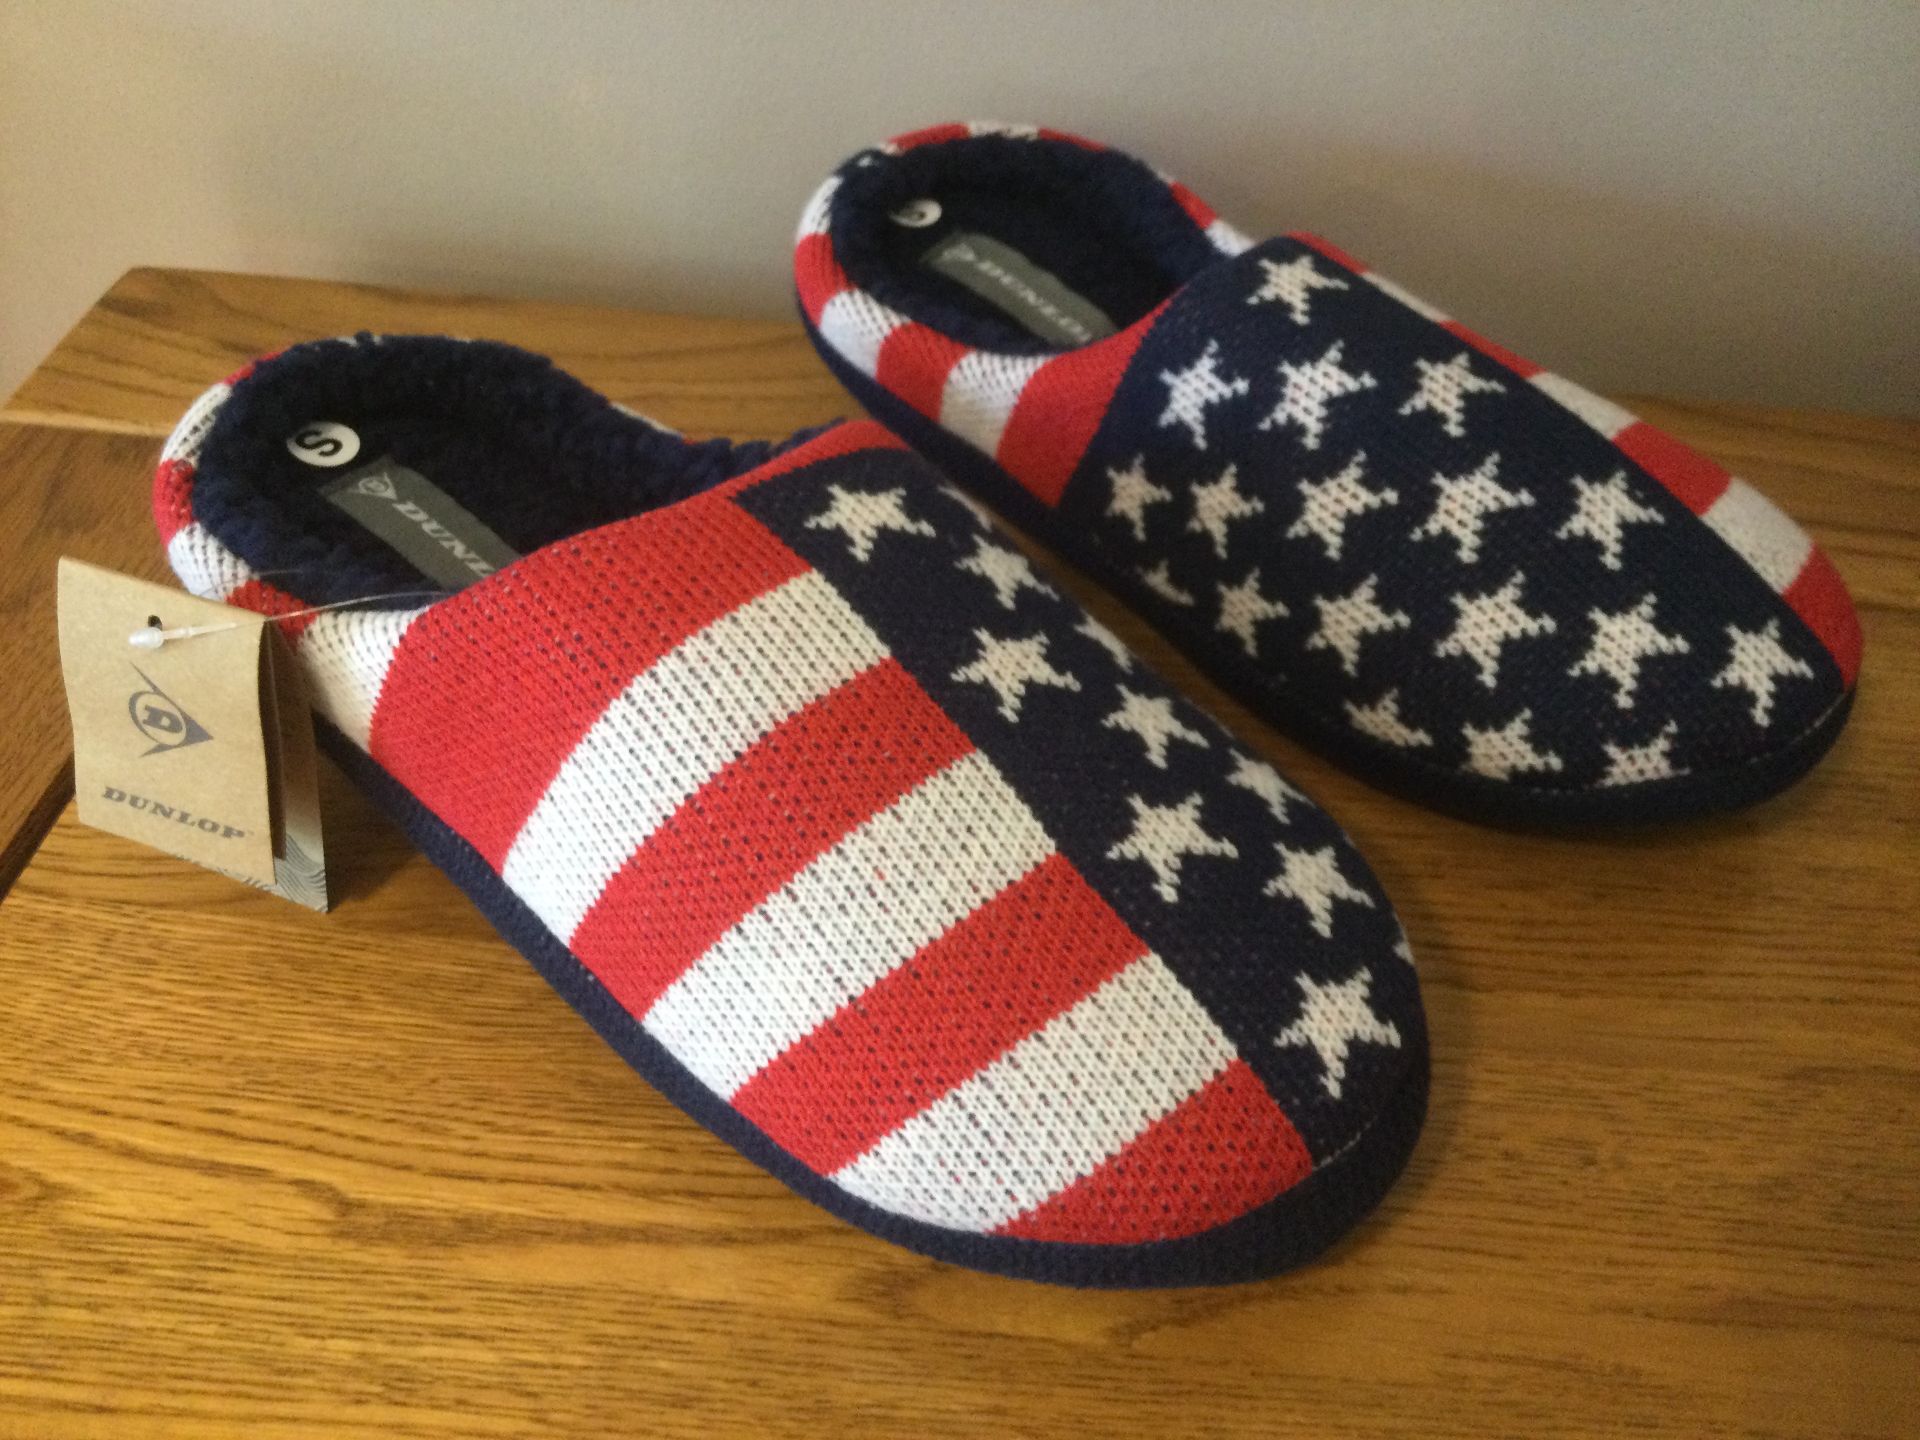 Job Lot 10 x Pairs Men's Dunlop, “USA Stars and Stripes” Memory Foam, Mule Slippers, Size S (6/7) - Image 2 of 6